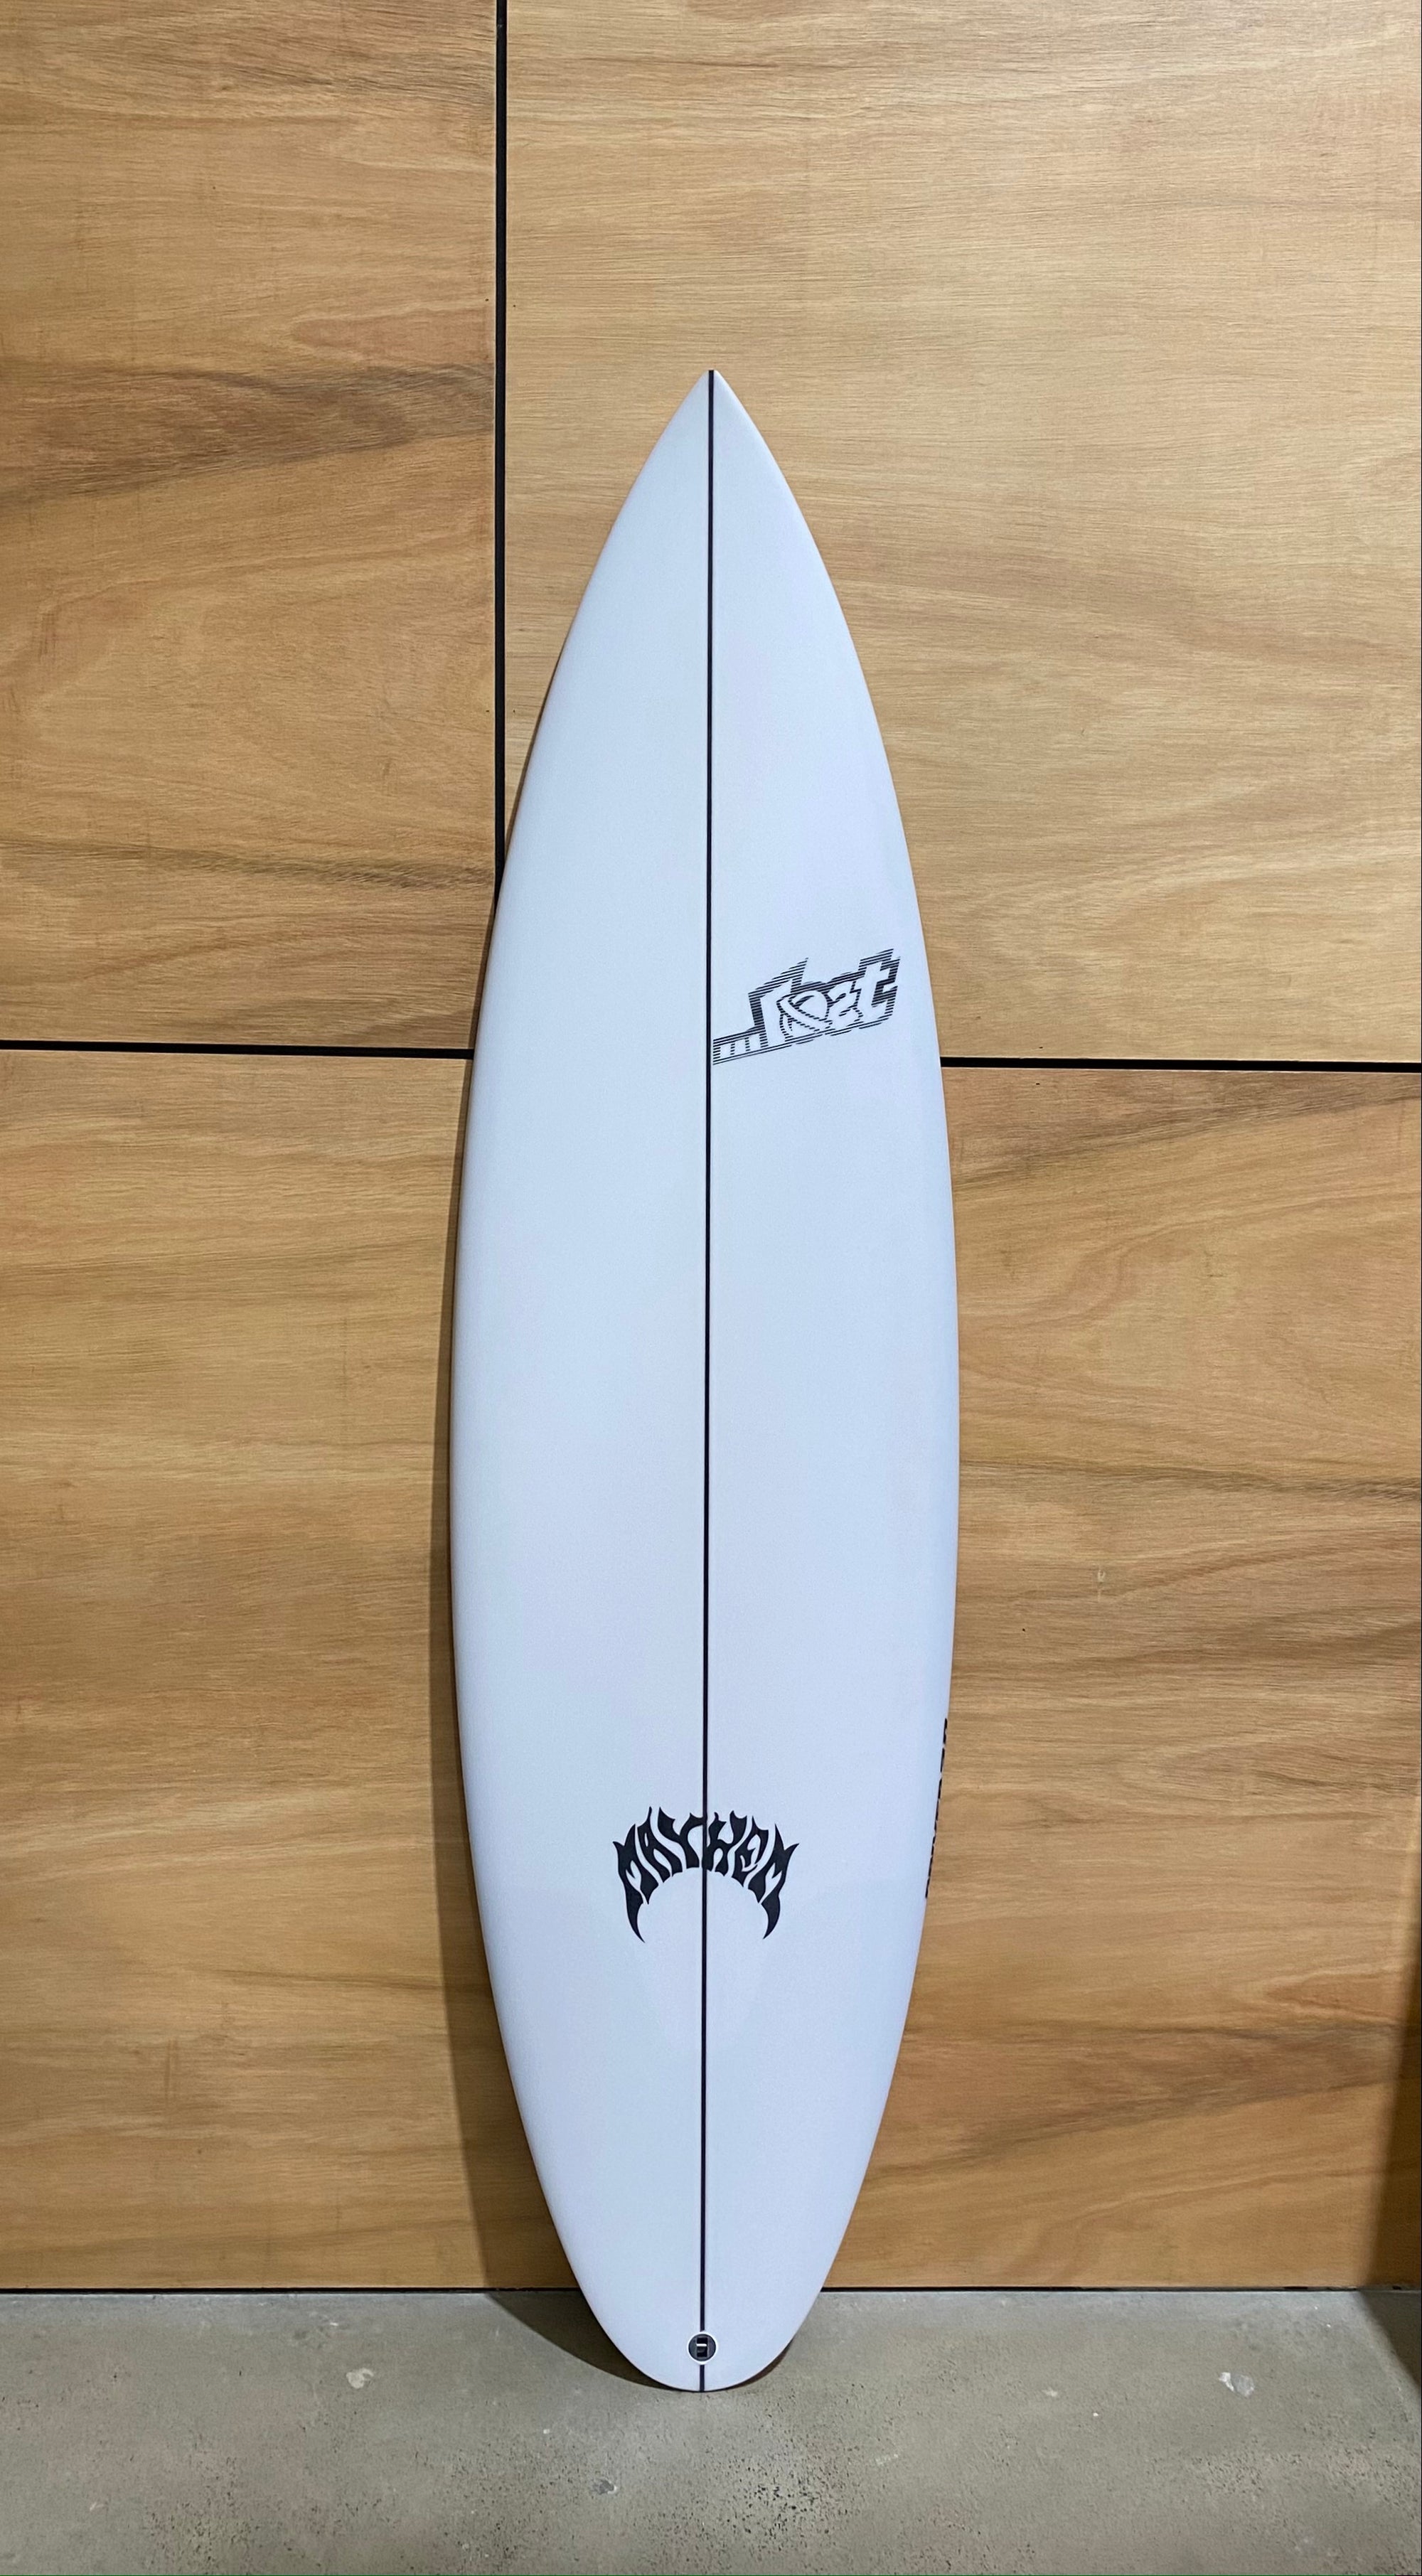 Lost DRIVER 2.0 Squash Tail | Light Speed EPS | Board Store